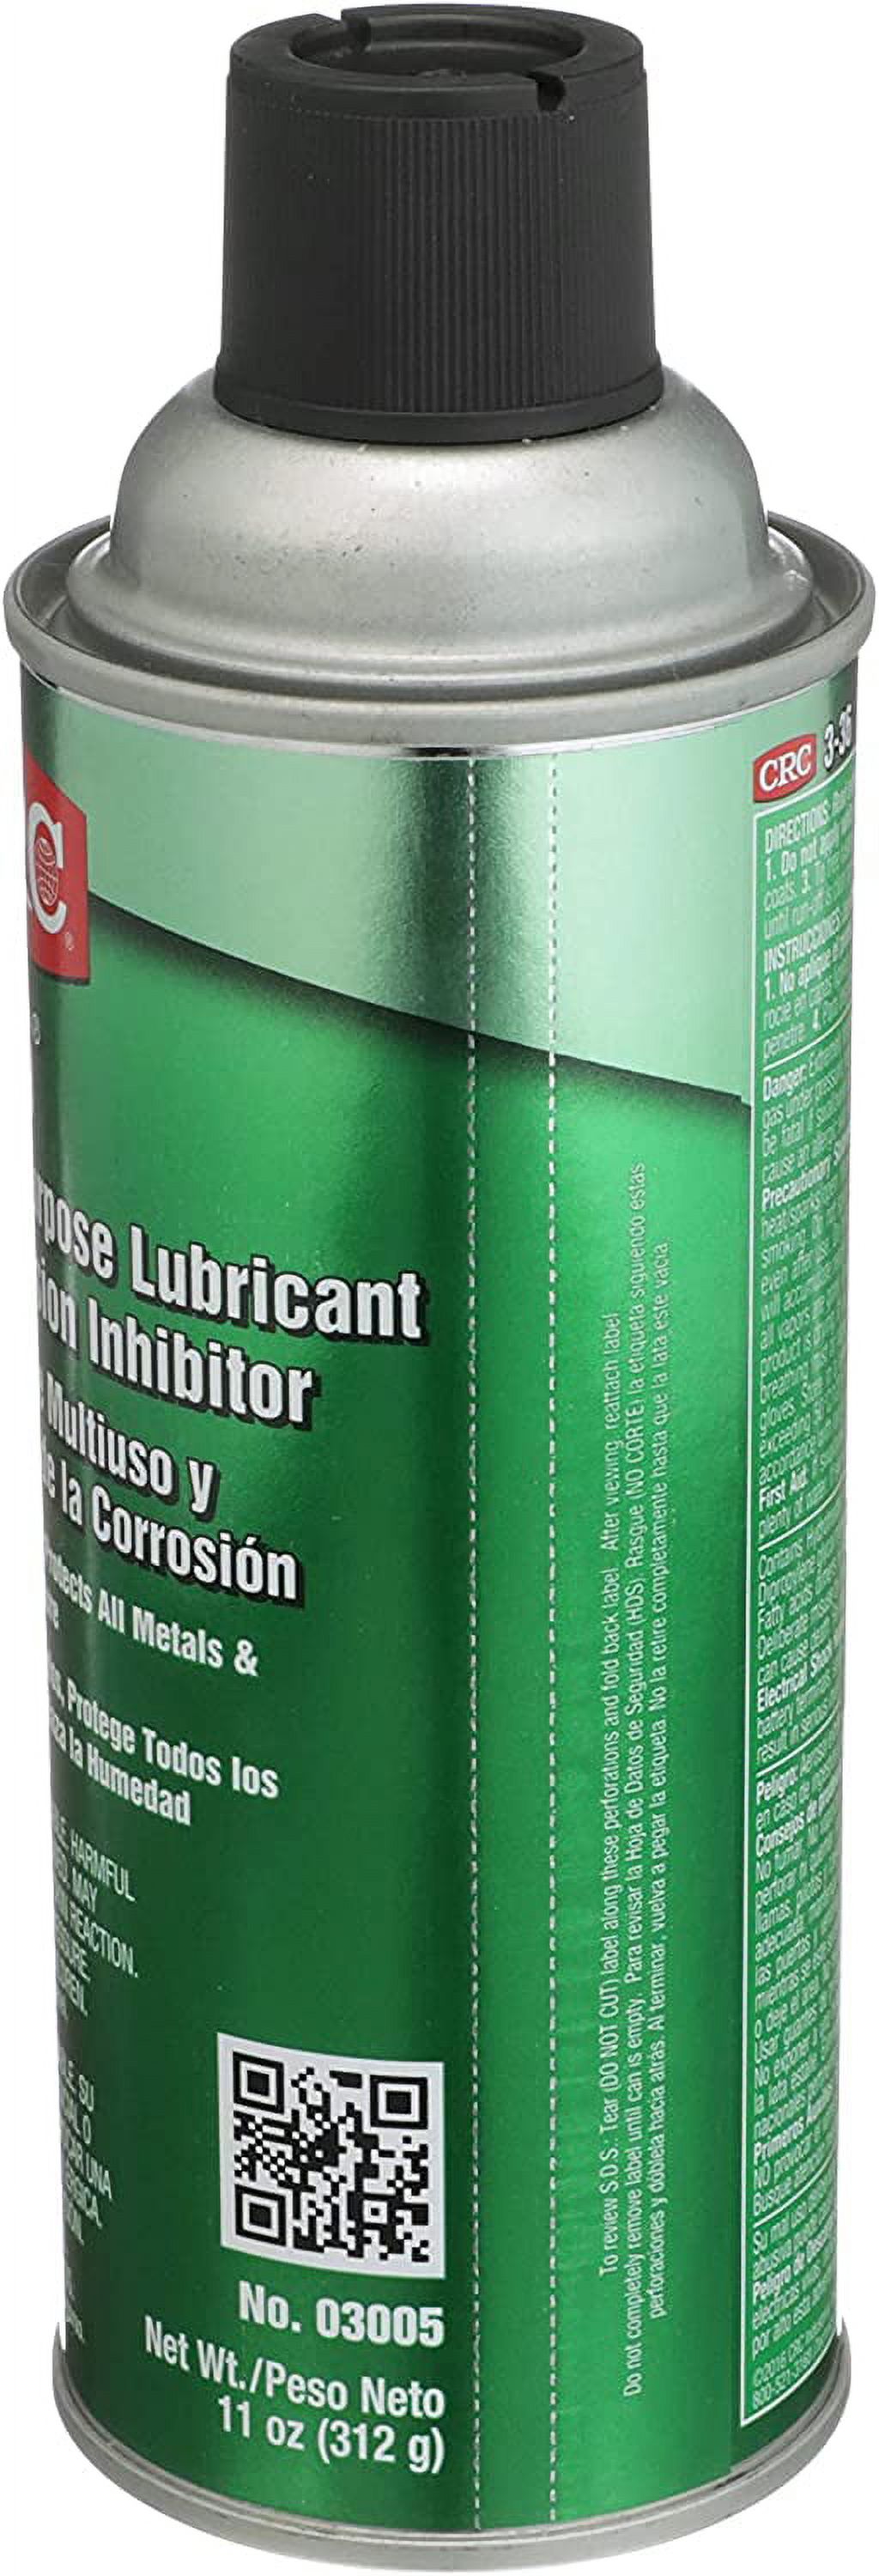 CRC 3-36 Multi-Purpose Lubricant and Corrosion Inhibitor, 11 oz Aerosol Can, Clear/Blue/Green - image 4 of 10